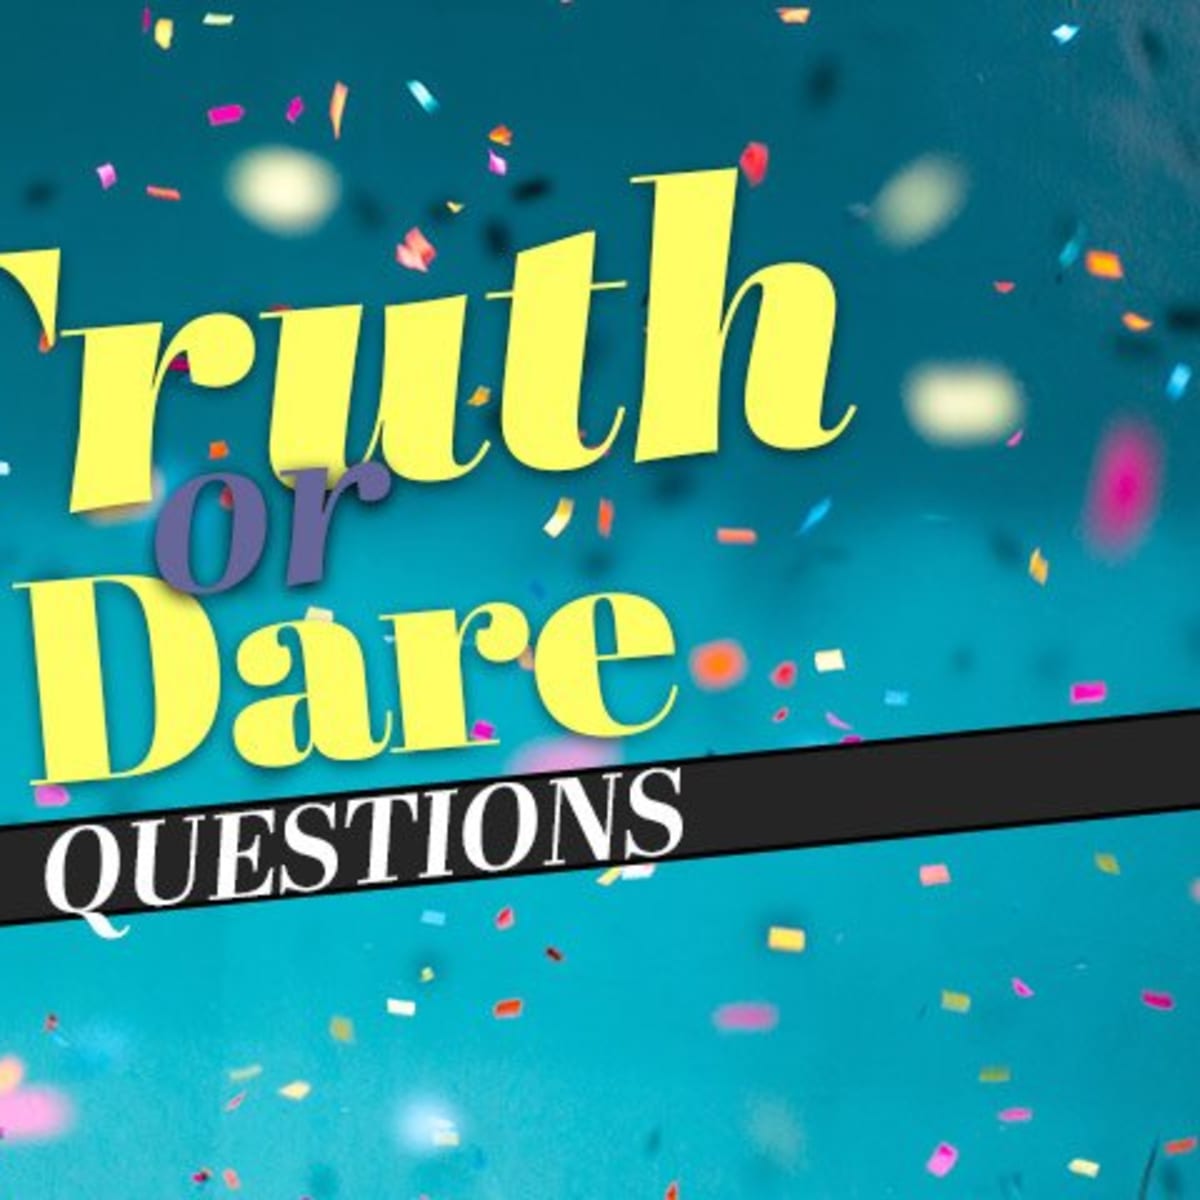 brad hasting recommends truth and dare stories pic